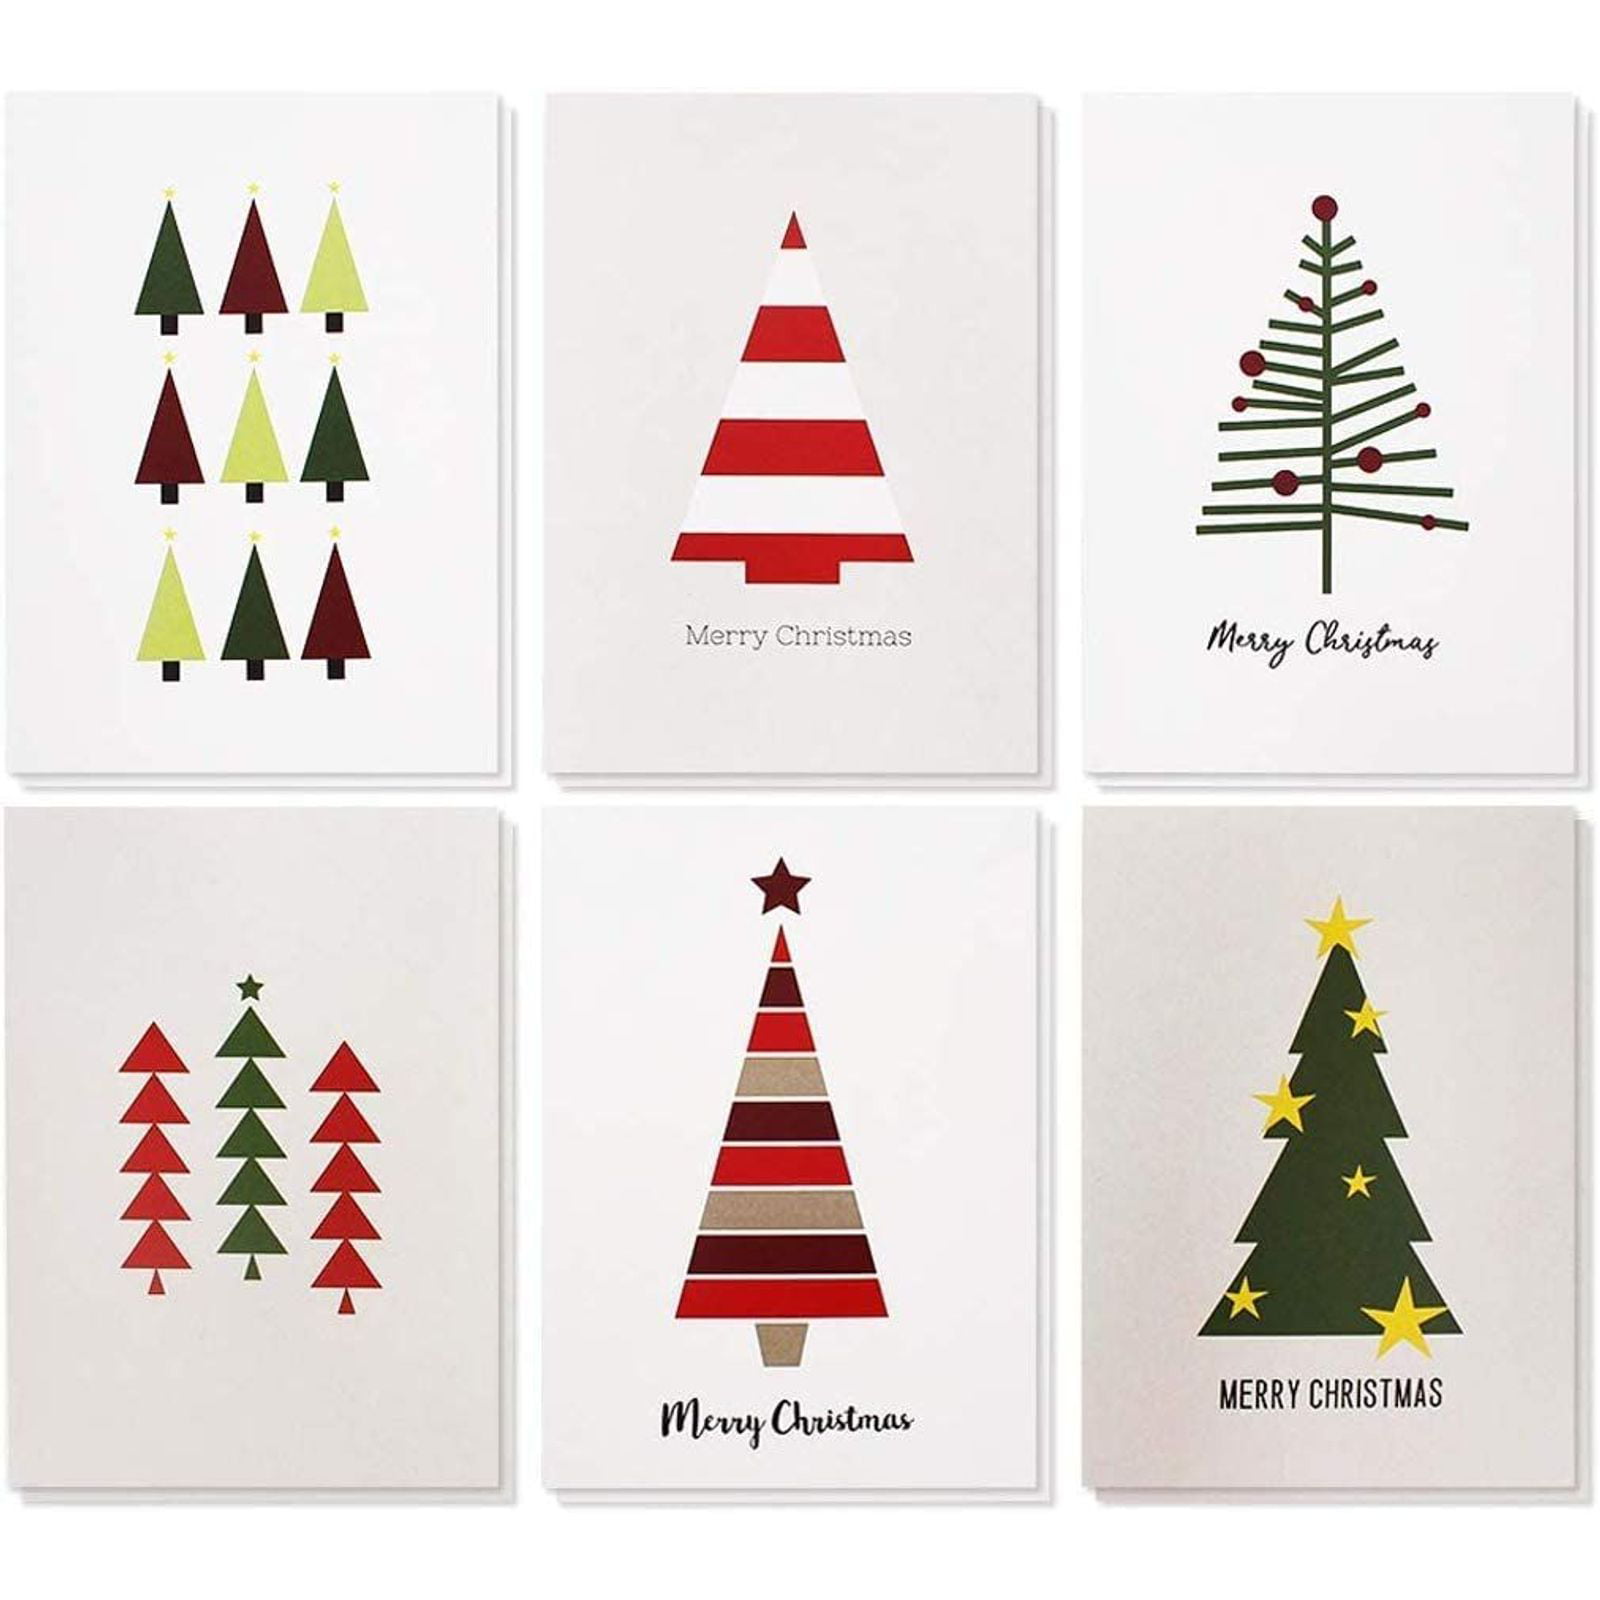 3.5 X 5, Pack of 250 with Envelopes Merry Christmas Greeting Card Winter Holiday Xmas Cards Box Set Vertical Orientation Printed Front Only Assorted 